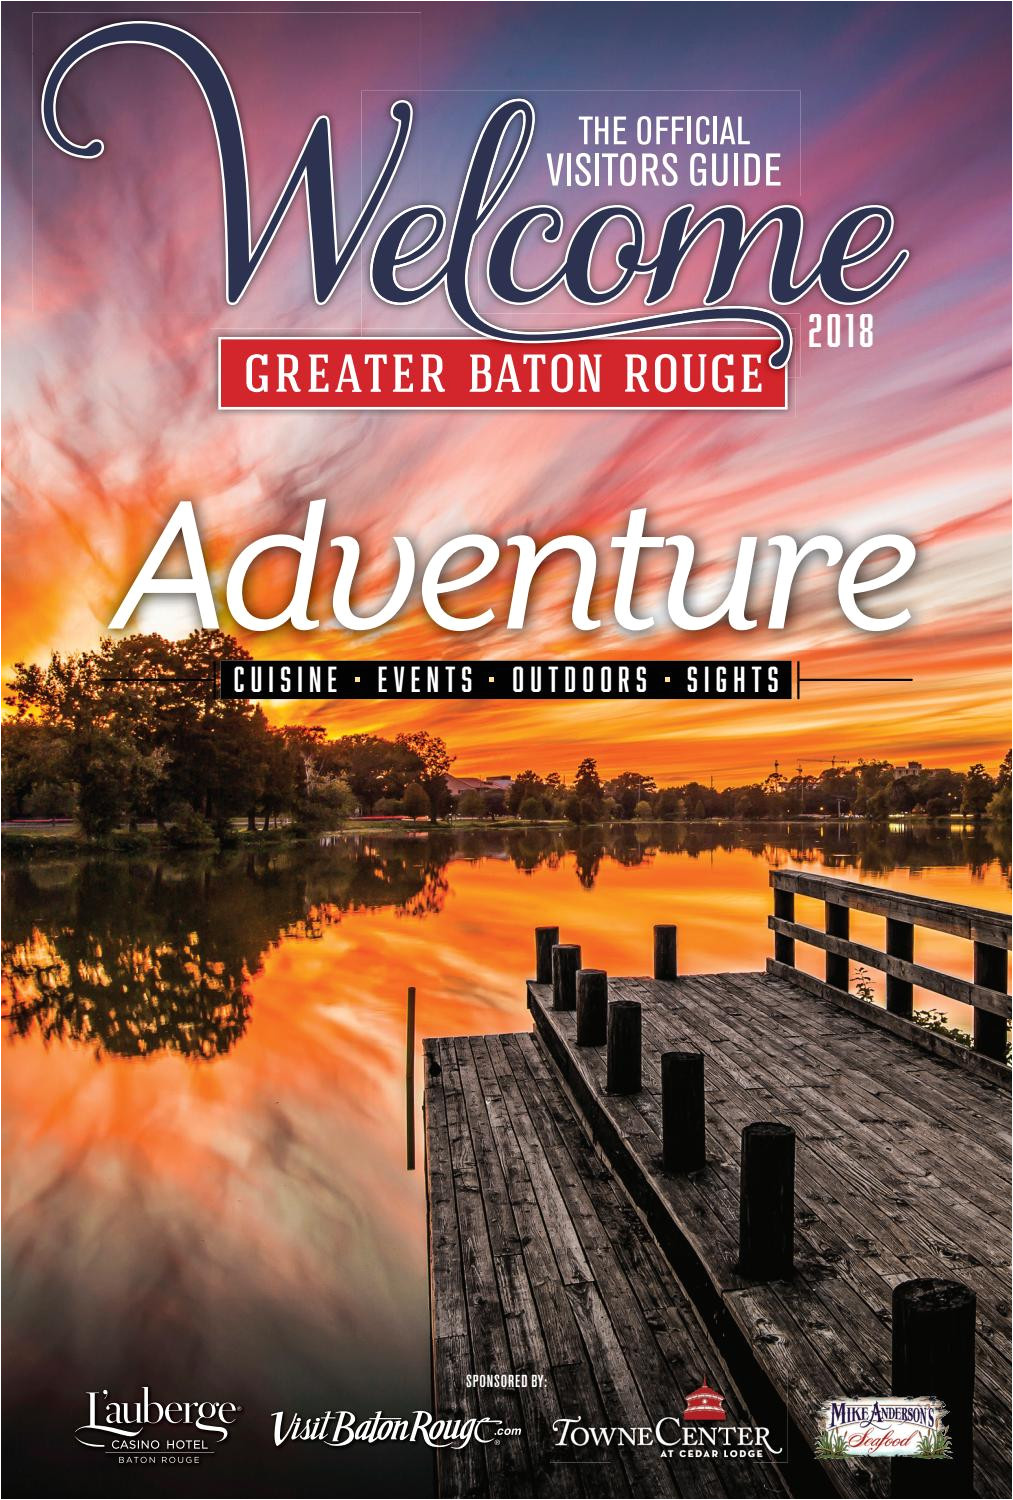 K Street Grill Baton Rouge 2018 Welcome the Official Visitors Guide to Greater Baton Rouge by